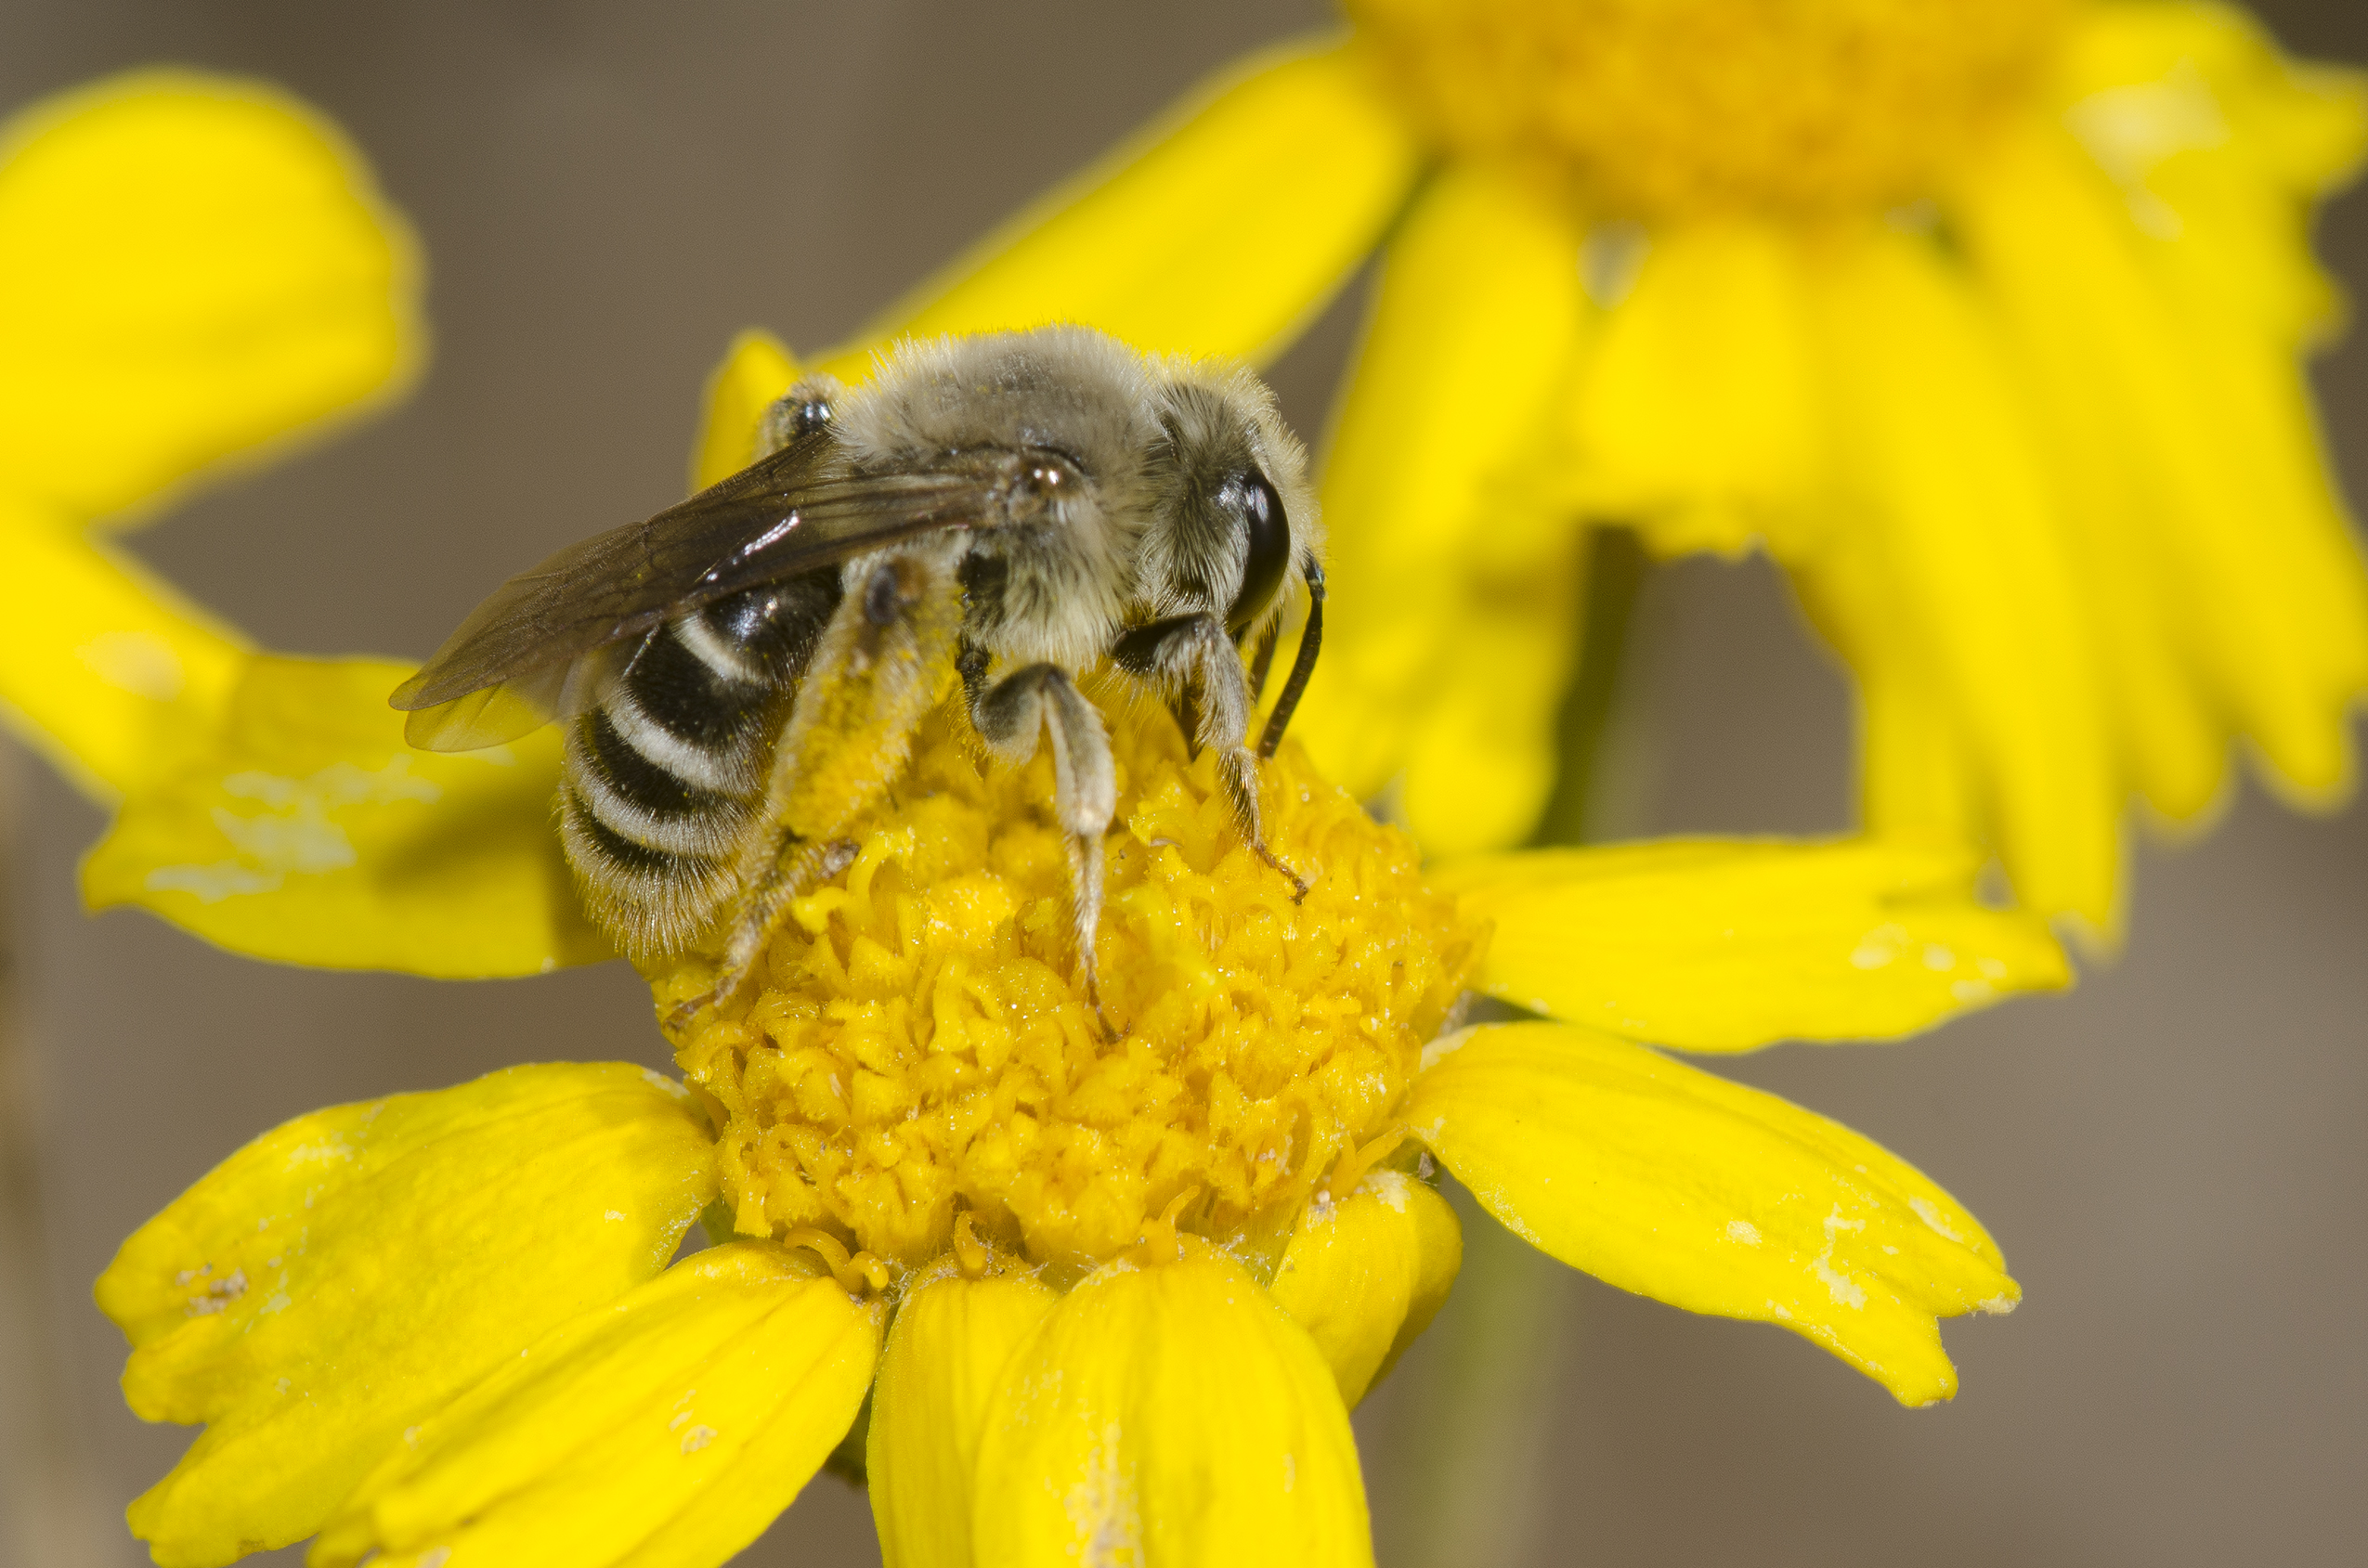 Mining bee drinks nectar from yellow flower